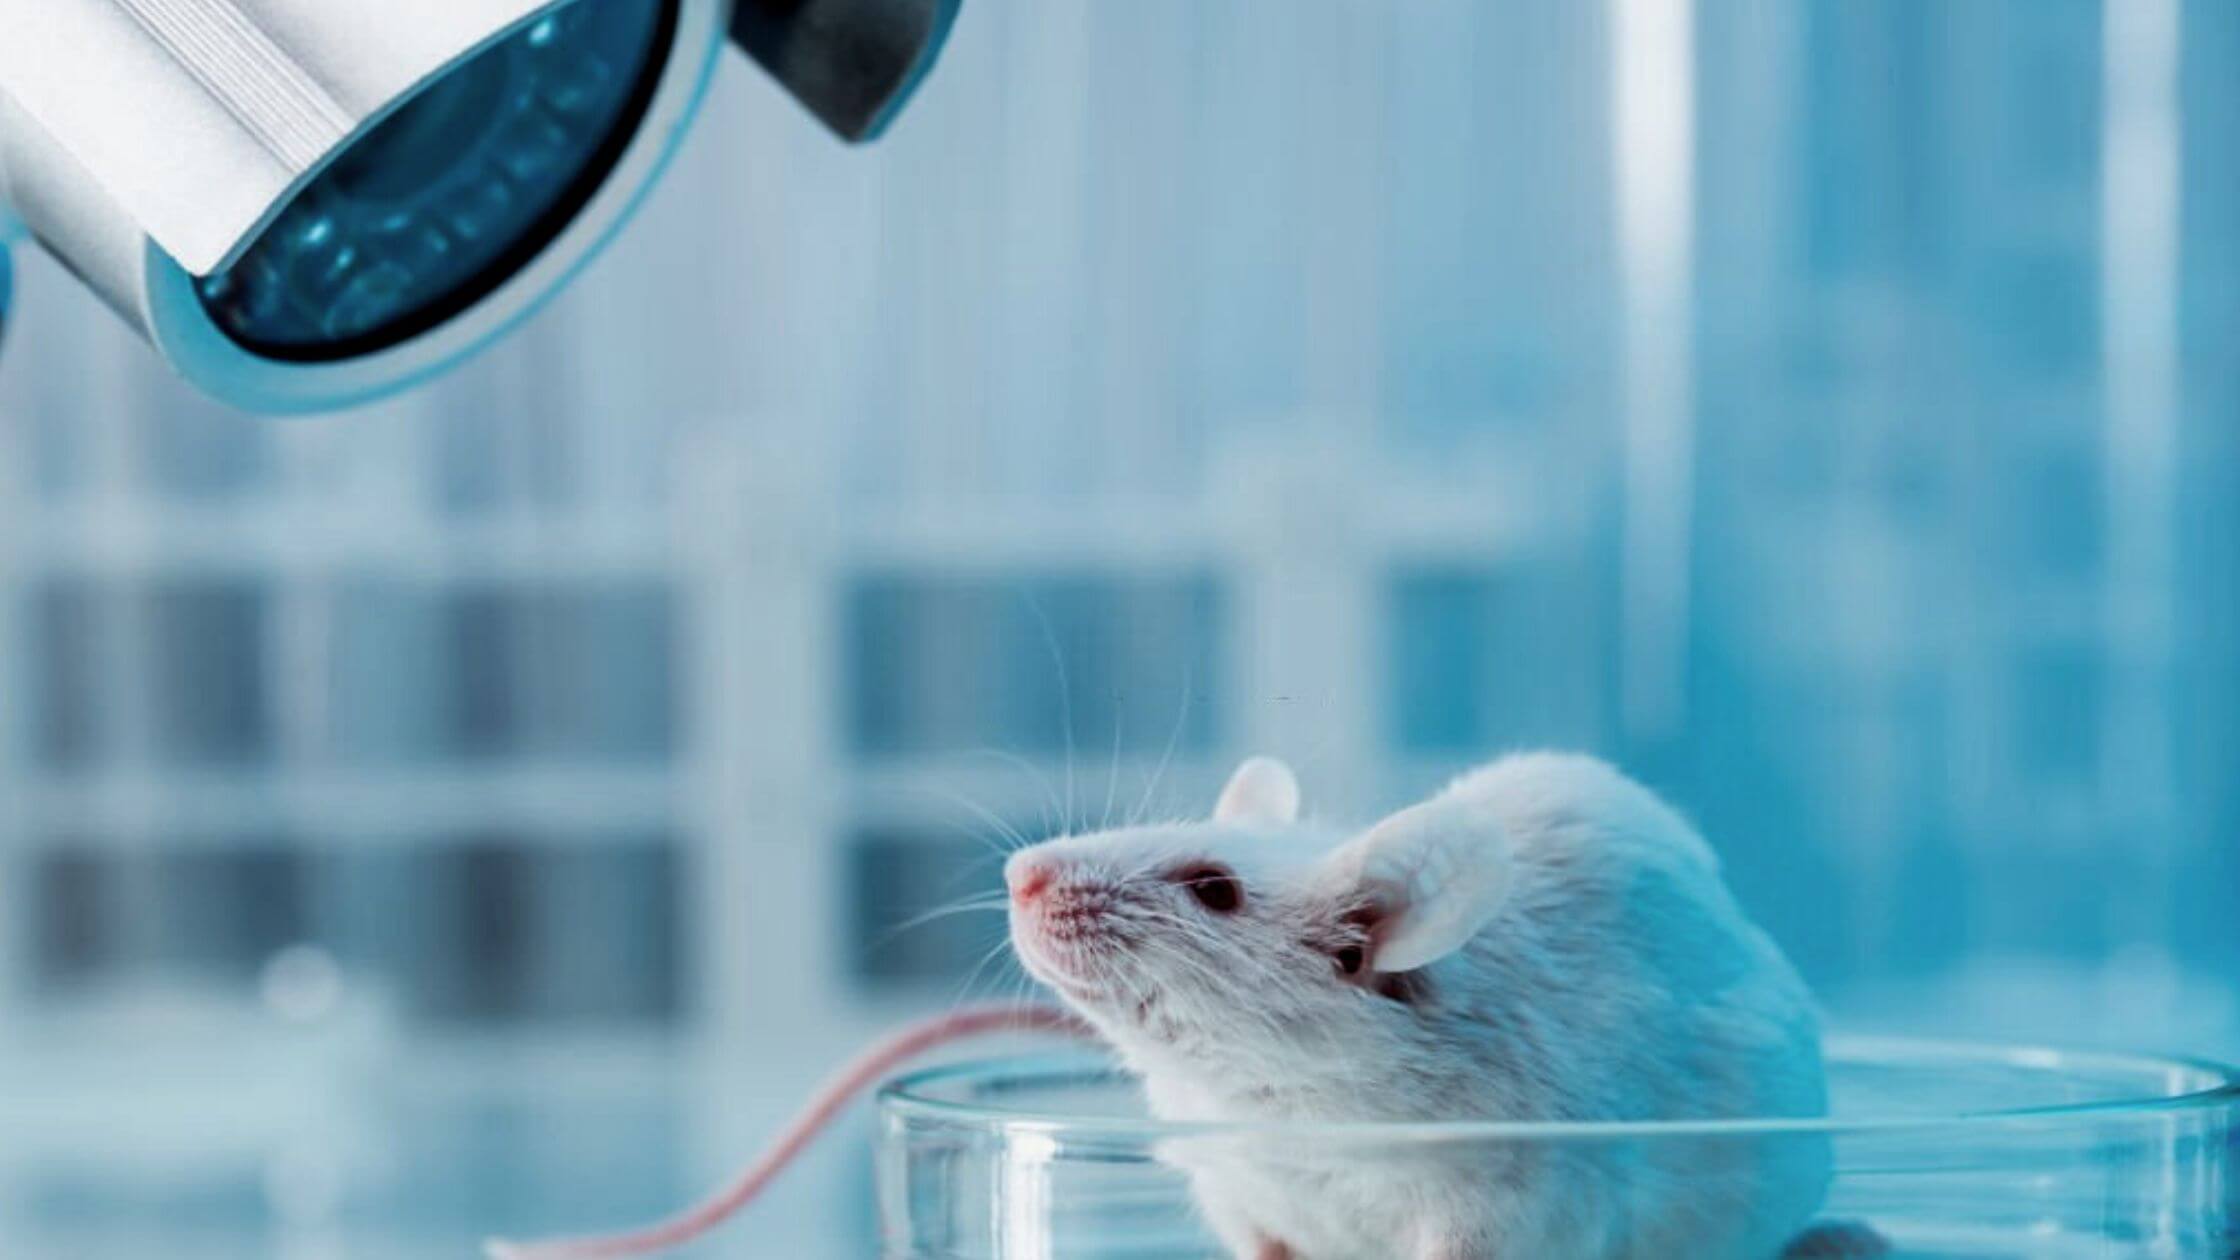 Mice Are Protected From Sudden Death Caused By Ruptured Blood Vessels